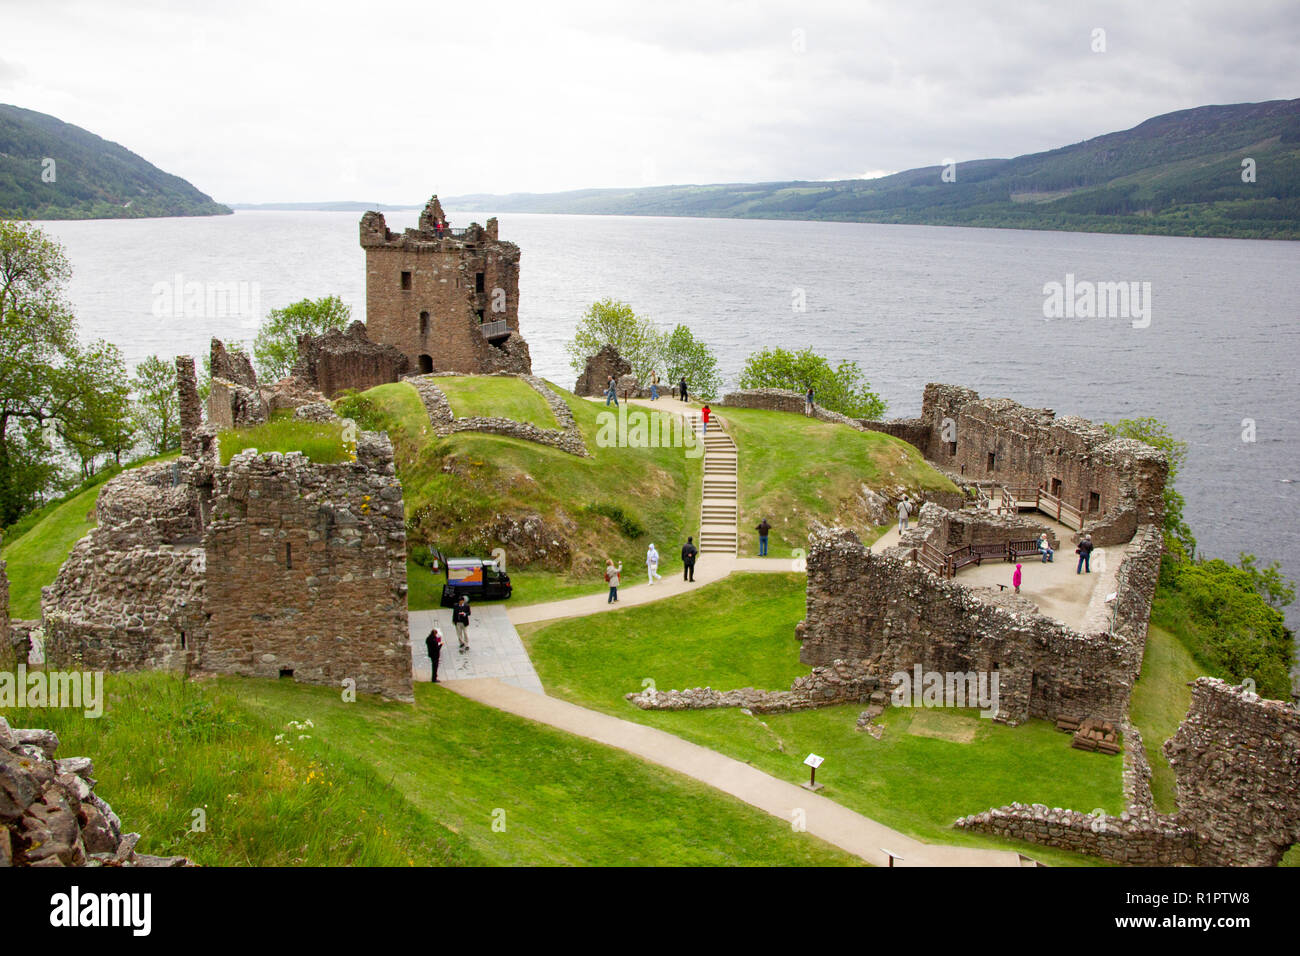 Loch Ness/Scotland - June 16th 2012: Loch Ness castle with lake in background Stock Photo